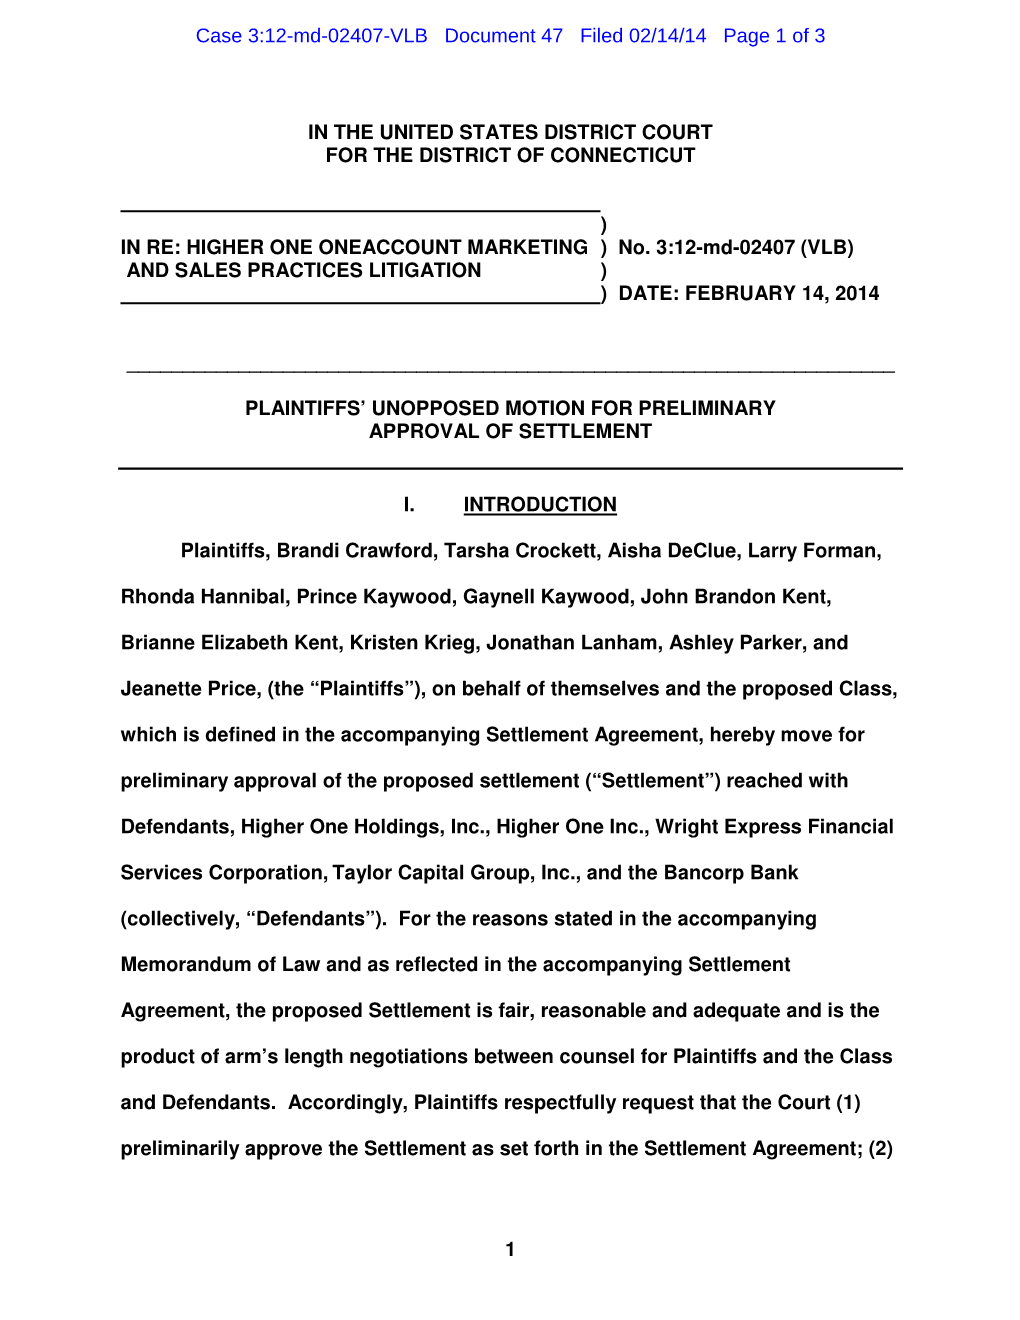 Case 3:12-Md-02407-VLB Document 47 Filed 02/14/14 Page 1 of 3